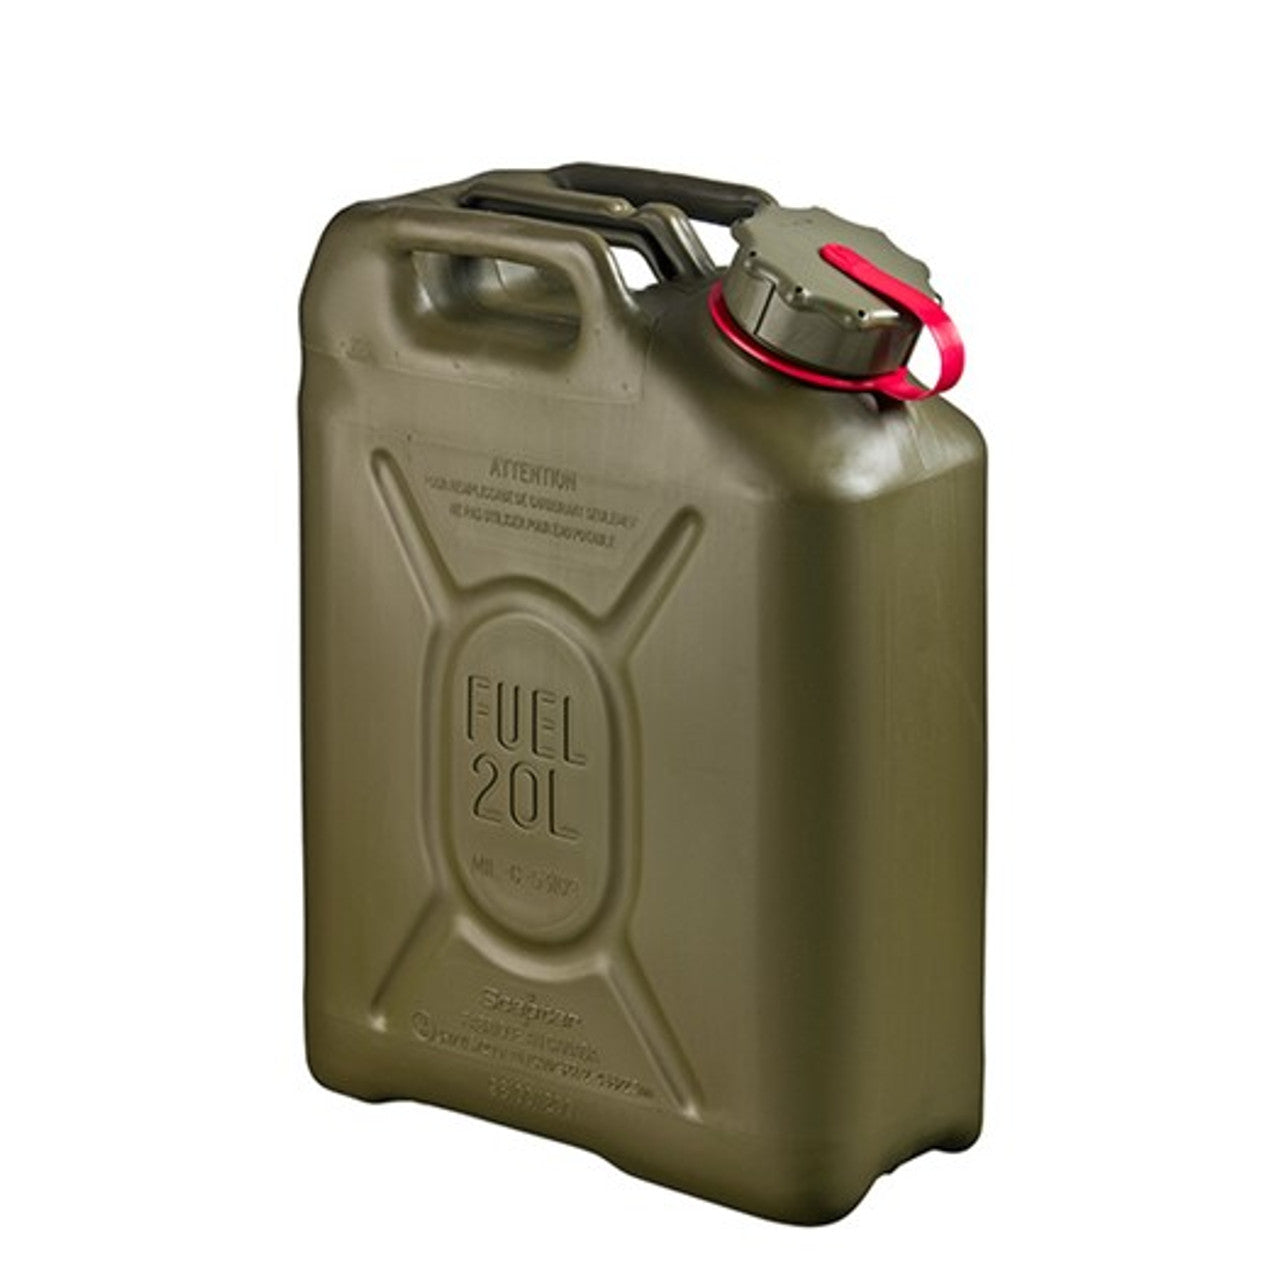 Scepter Military Fuel Canister 20L